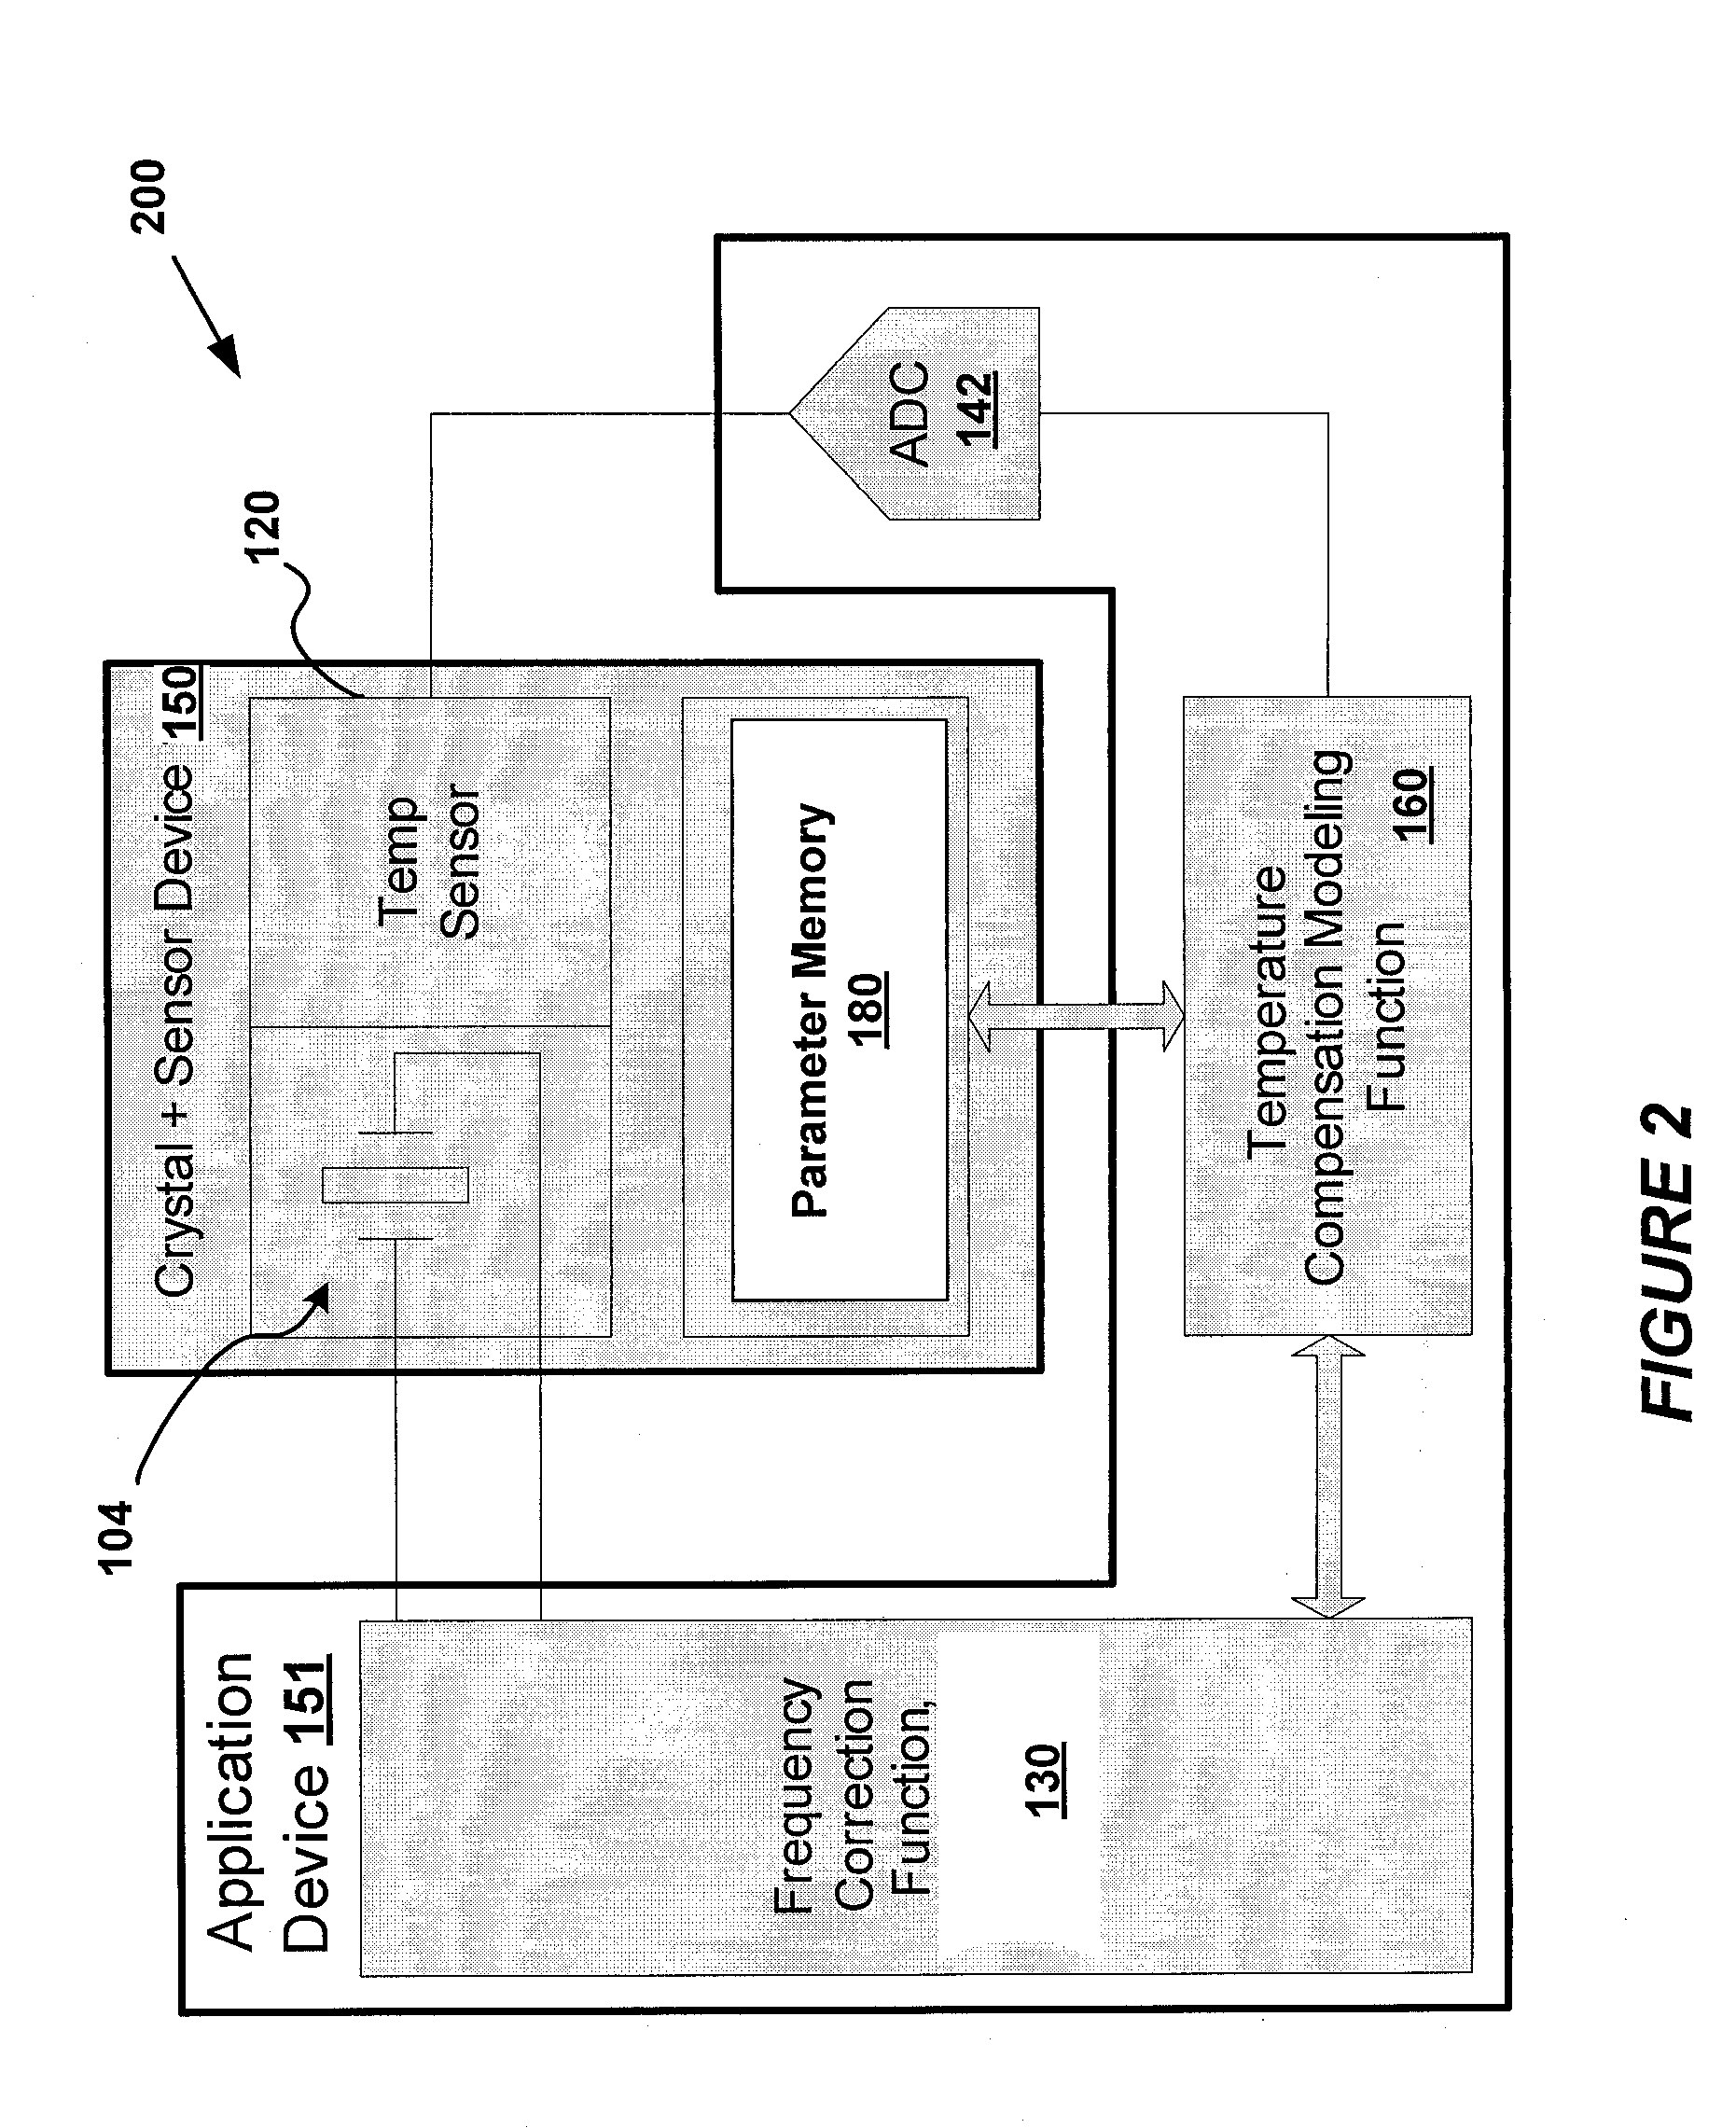 System and Method for Providing Temperature Correction in a Crystal Oscillator